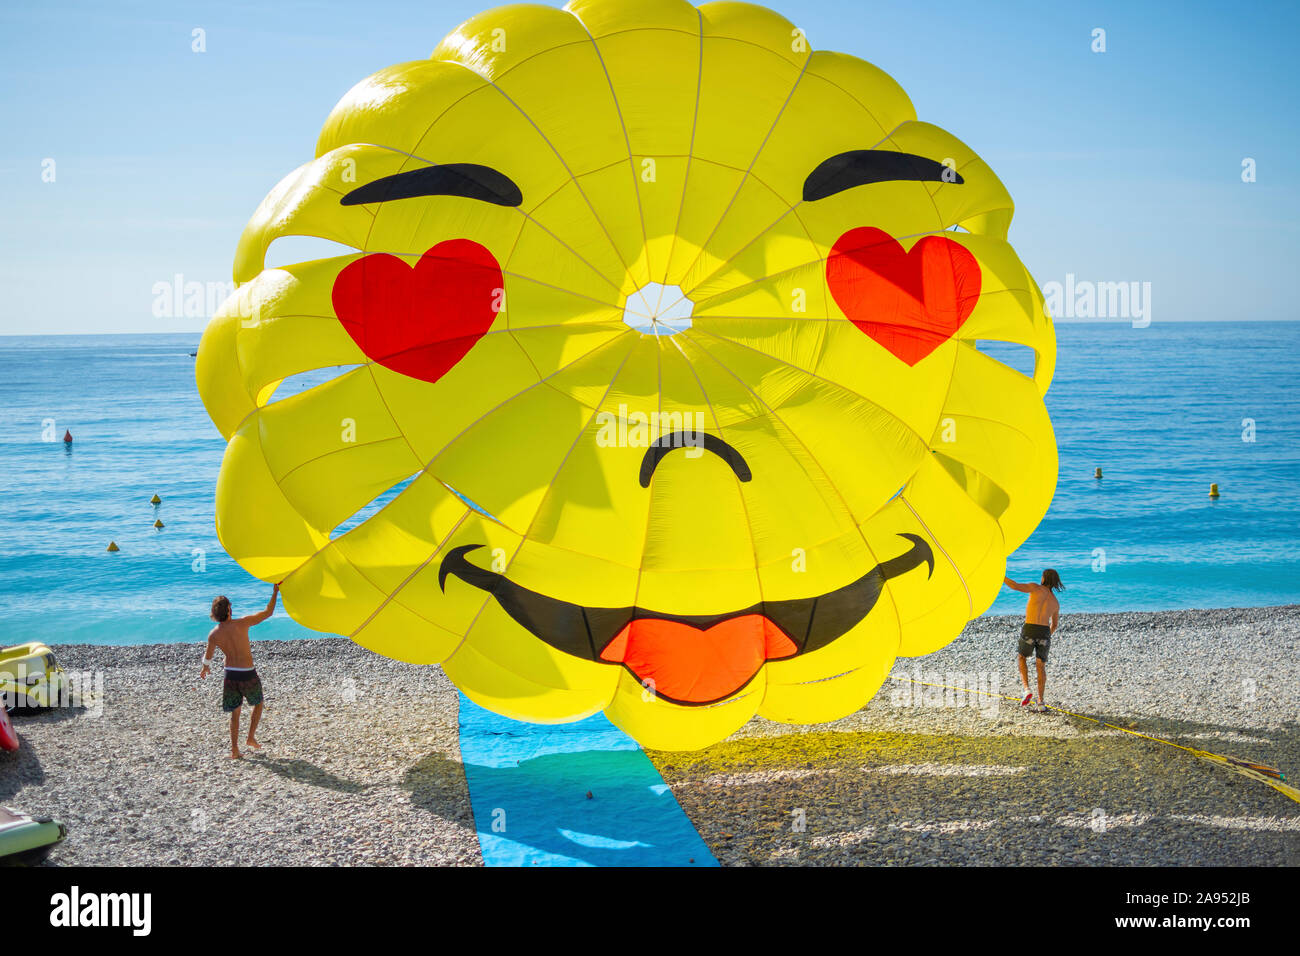 Two young men guide a happy face parasail parachute as it leaves the beach at the Bay of Angels on the Riviera in Nice, France. Stock Photo